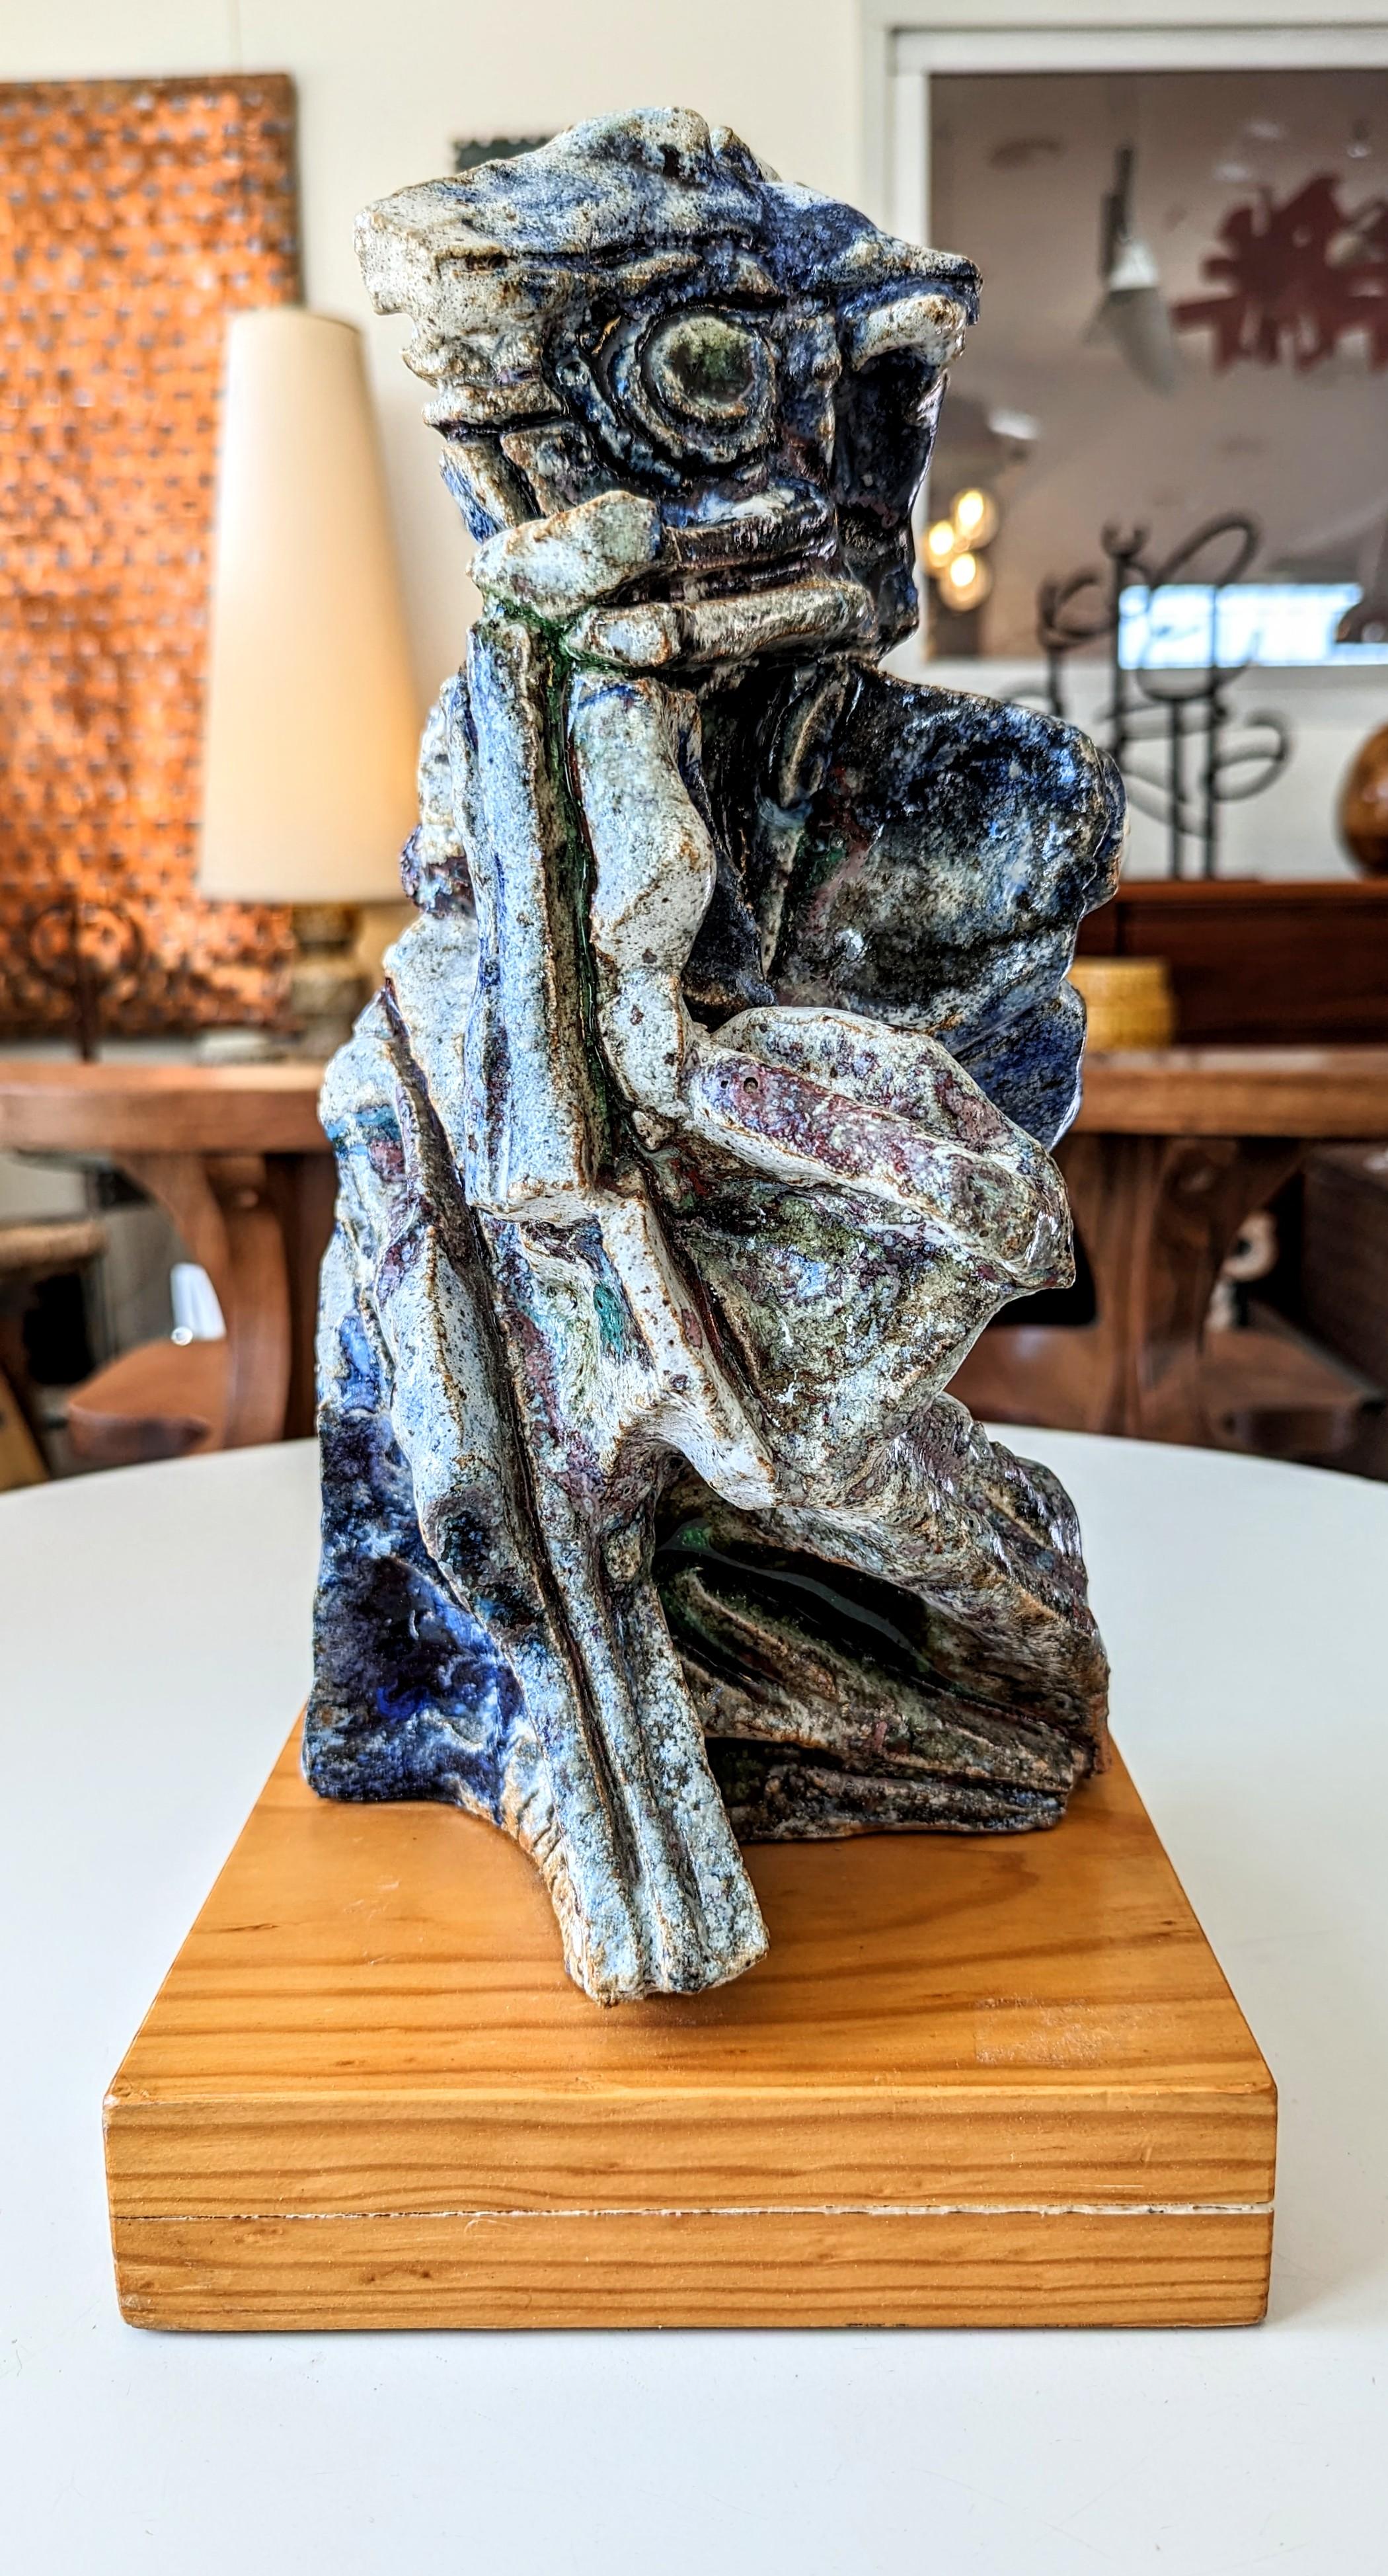 Rare and beautiful large ceramic sculpture by Francisco Espinoza Dueñas manufactured in Spain in 1970s. Francisco Espinoza Dueñas (Lima, Perú, 1926-Sevilla, España, 2020)[1]? was a Peruvian artist installed in Spain.[2]? He developed his artistic